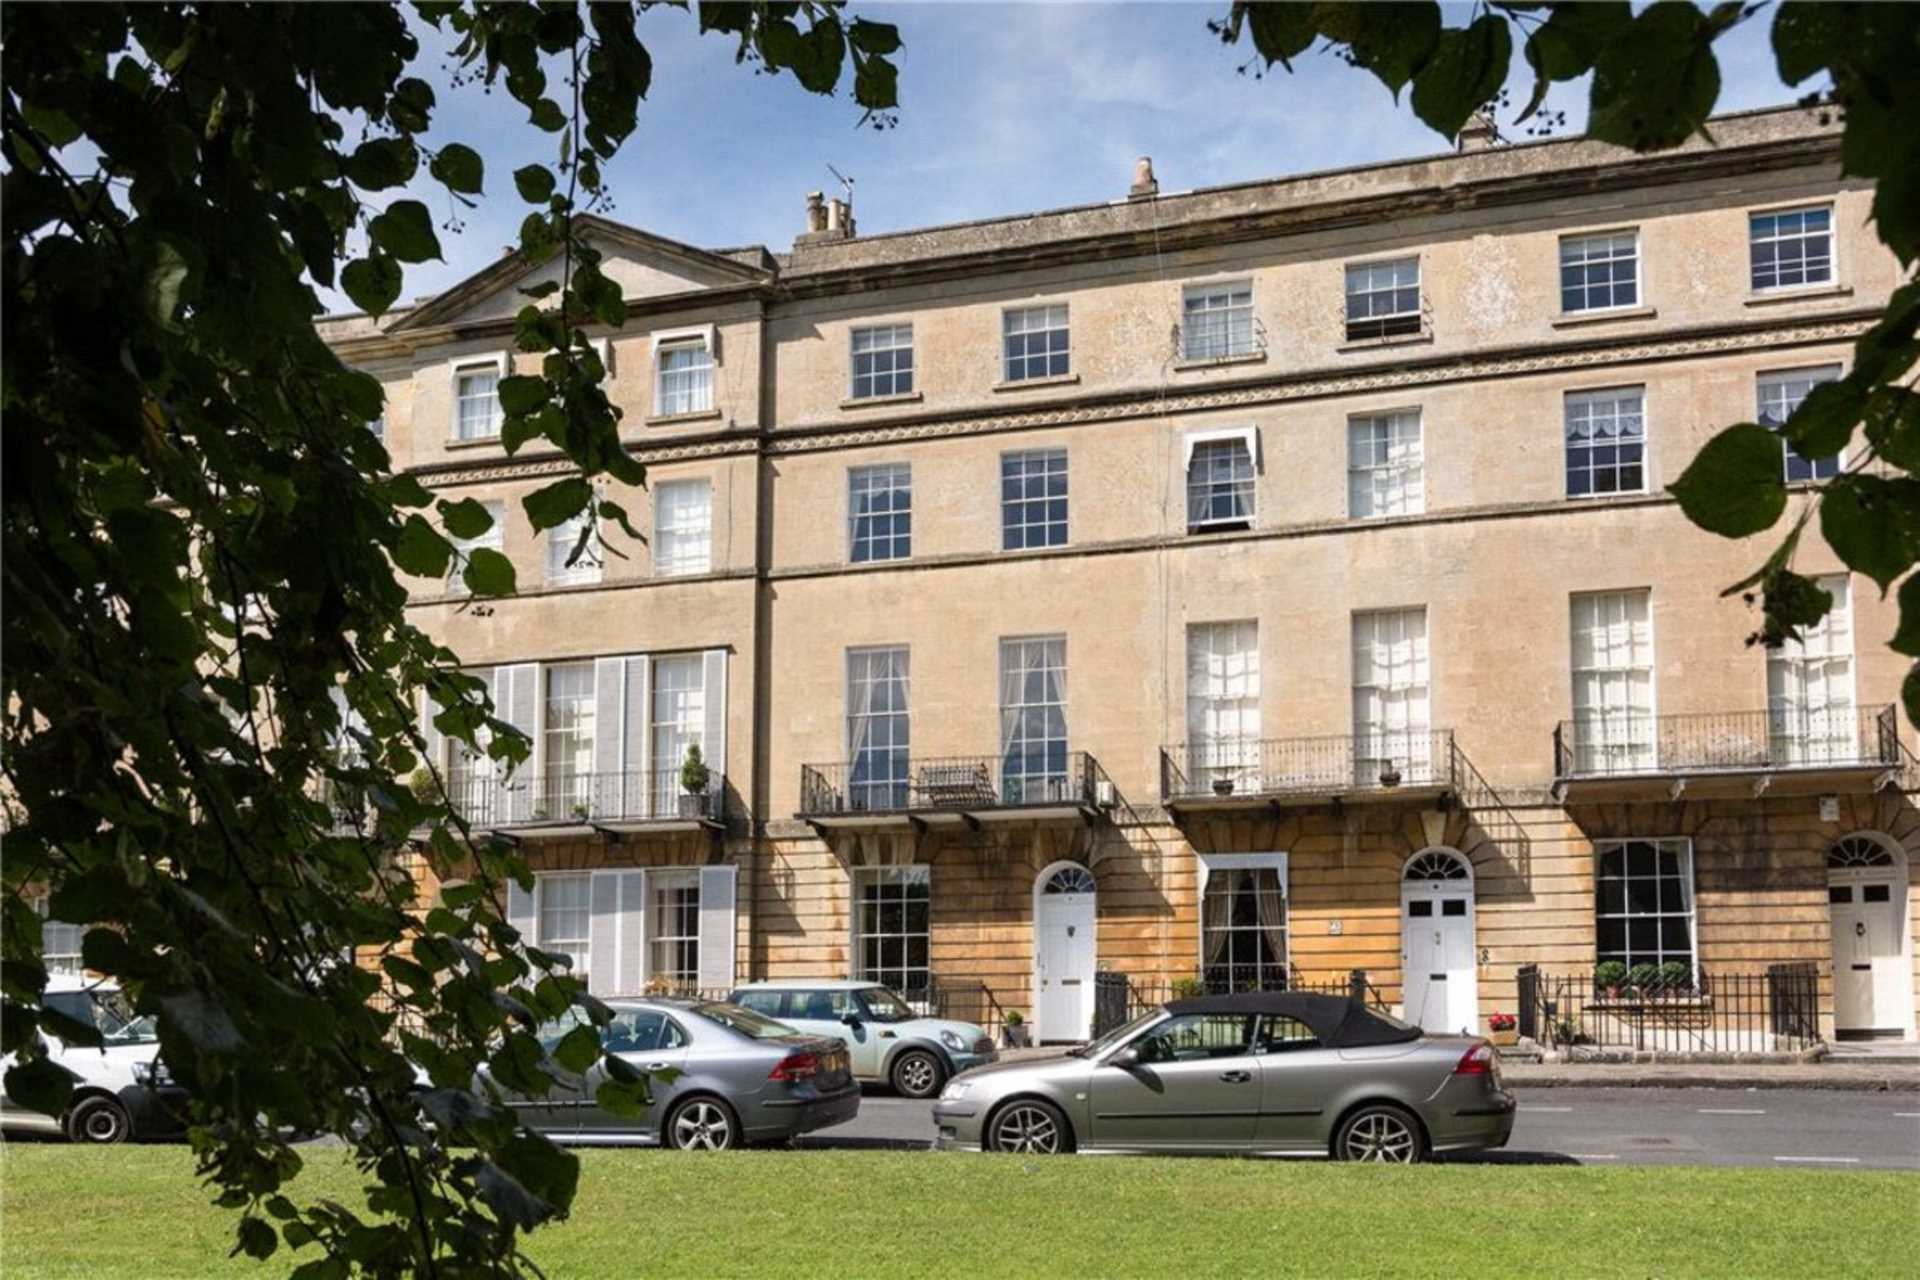 Swallows Property Letting - 2 Bedroom Maisonette, Sion Hill Place, Bath